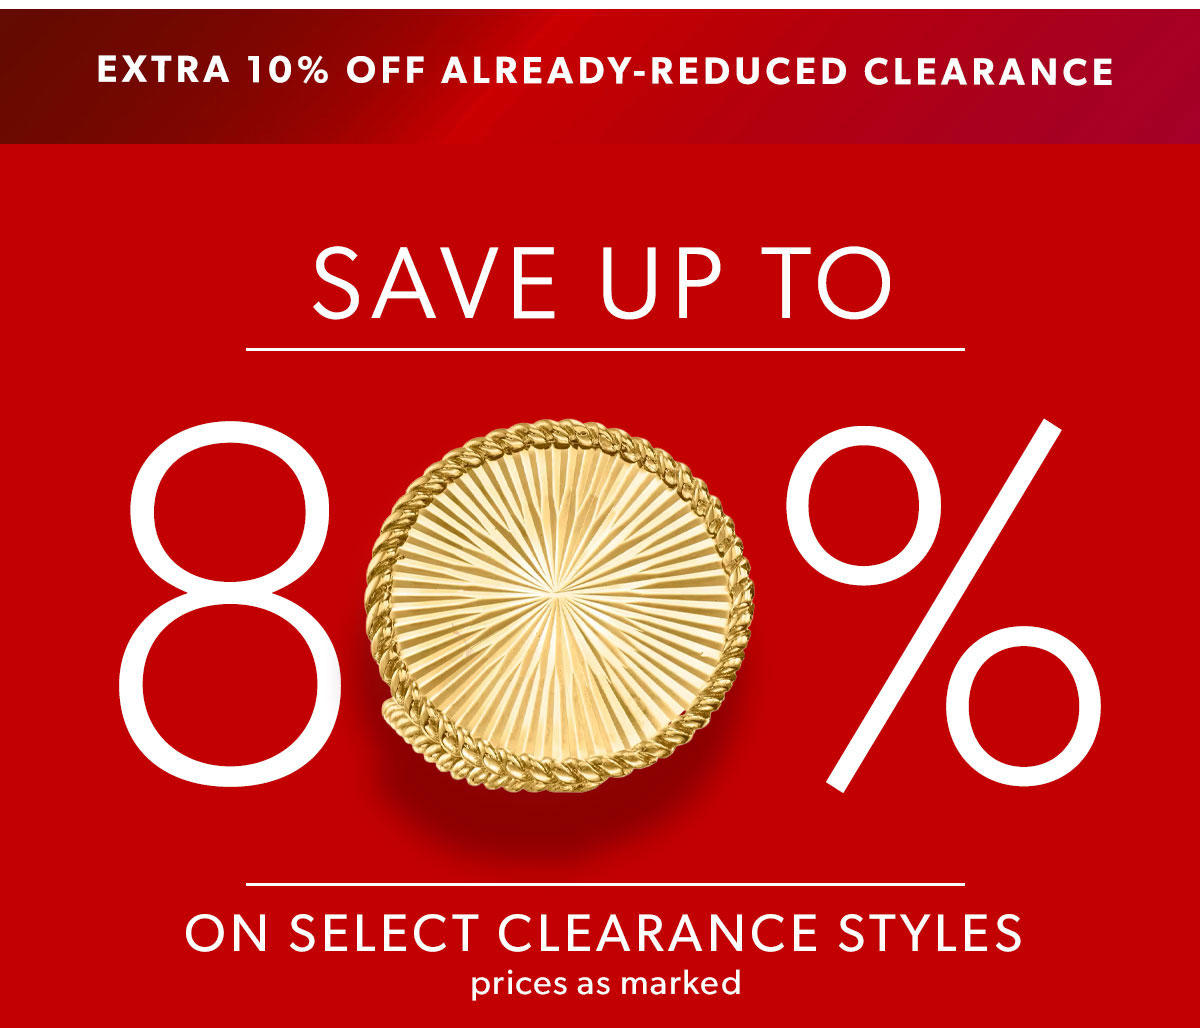 Save Up To 80% On Select Clearance Styles